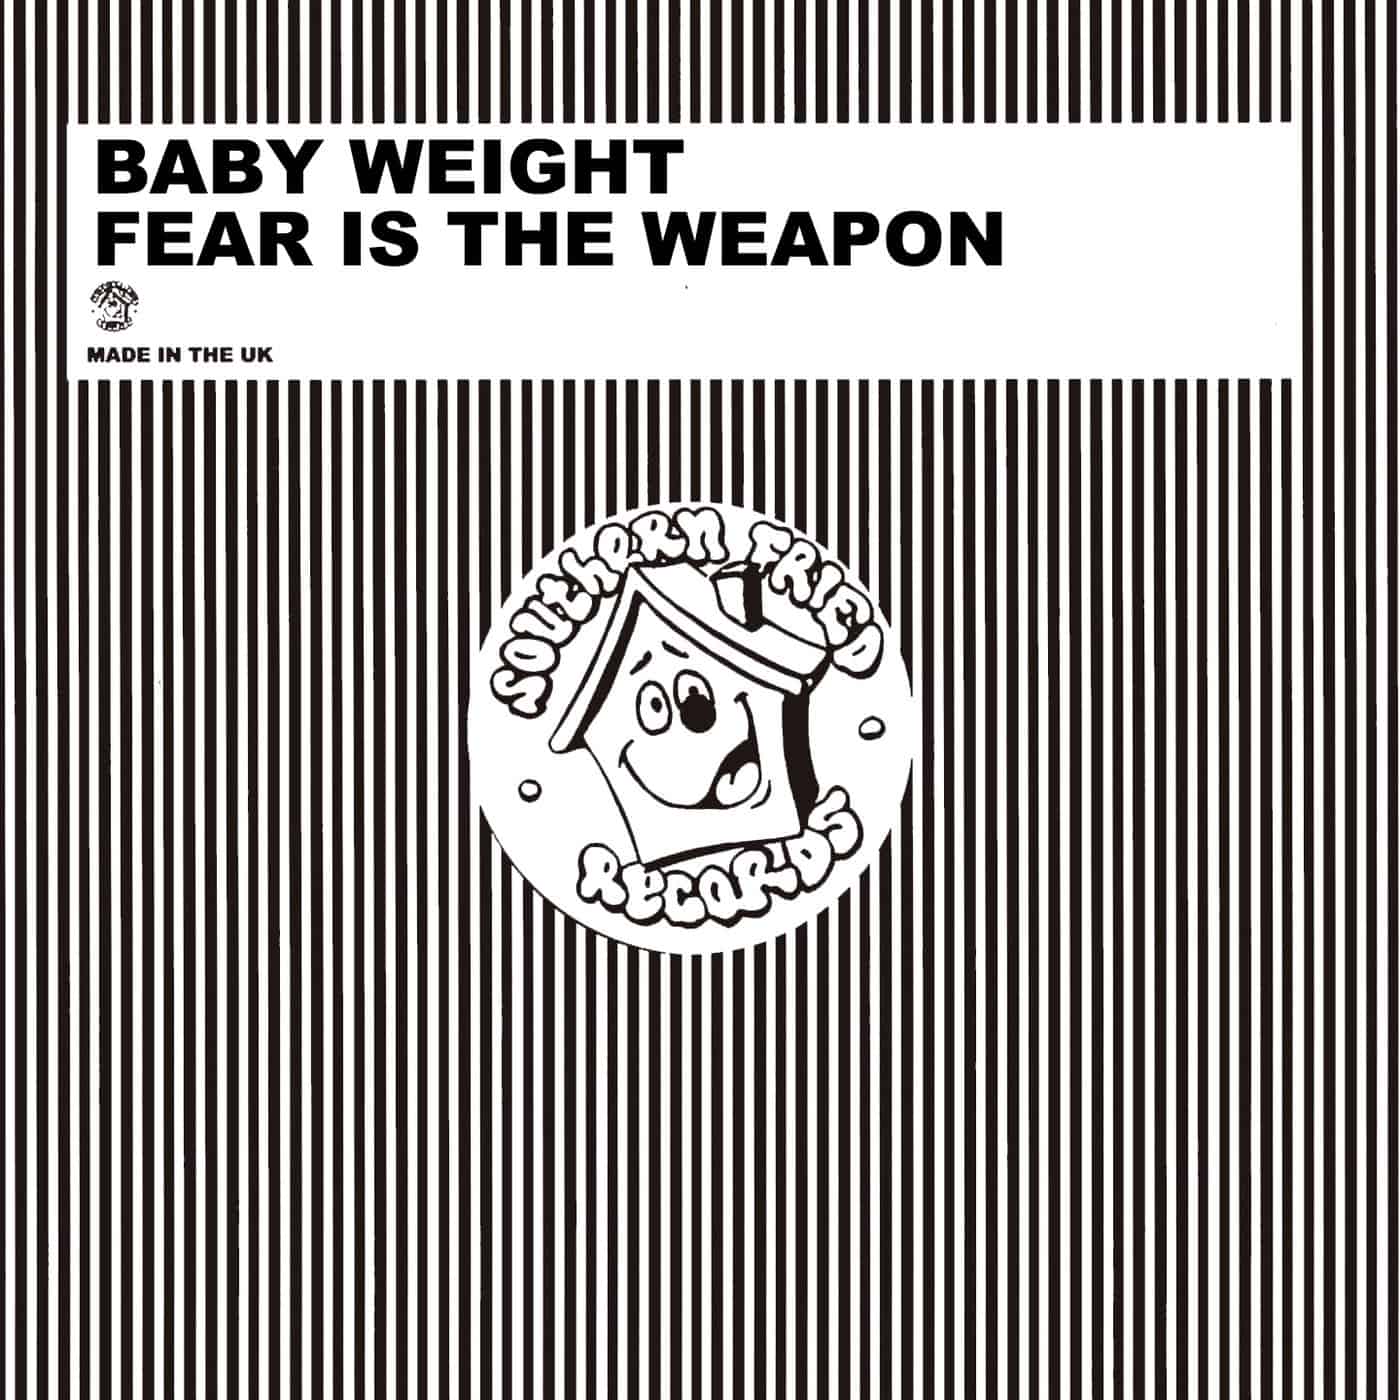 image cover: Baby Weight - Fear is the Weapon on Southern Fried Records